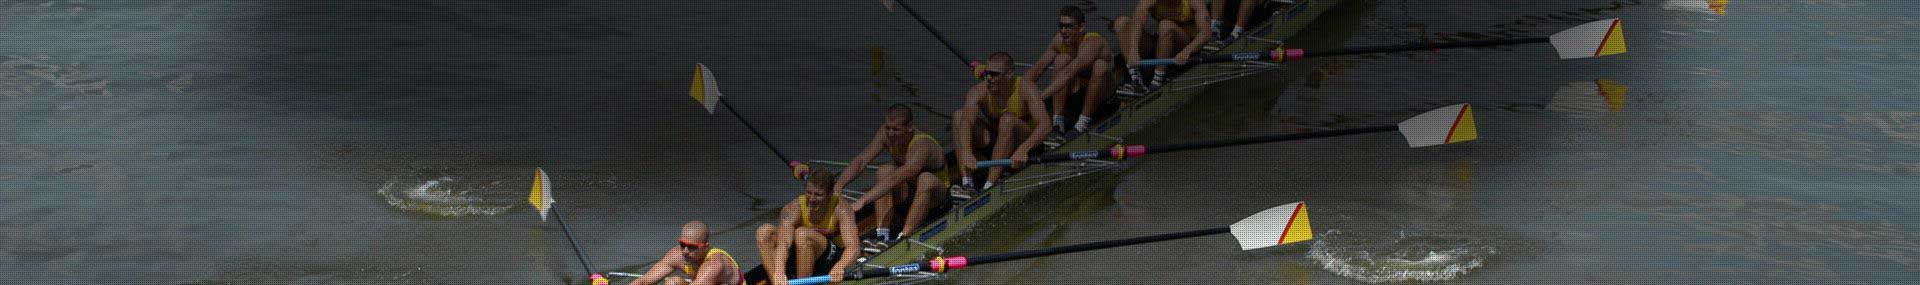 Rowing 